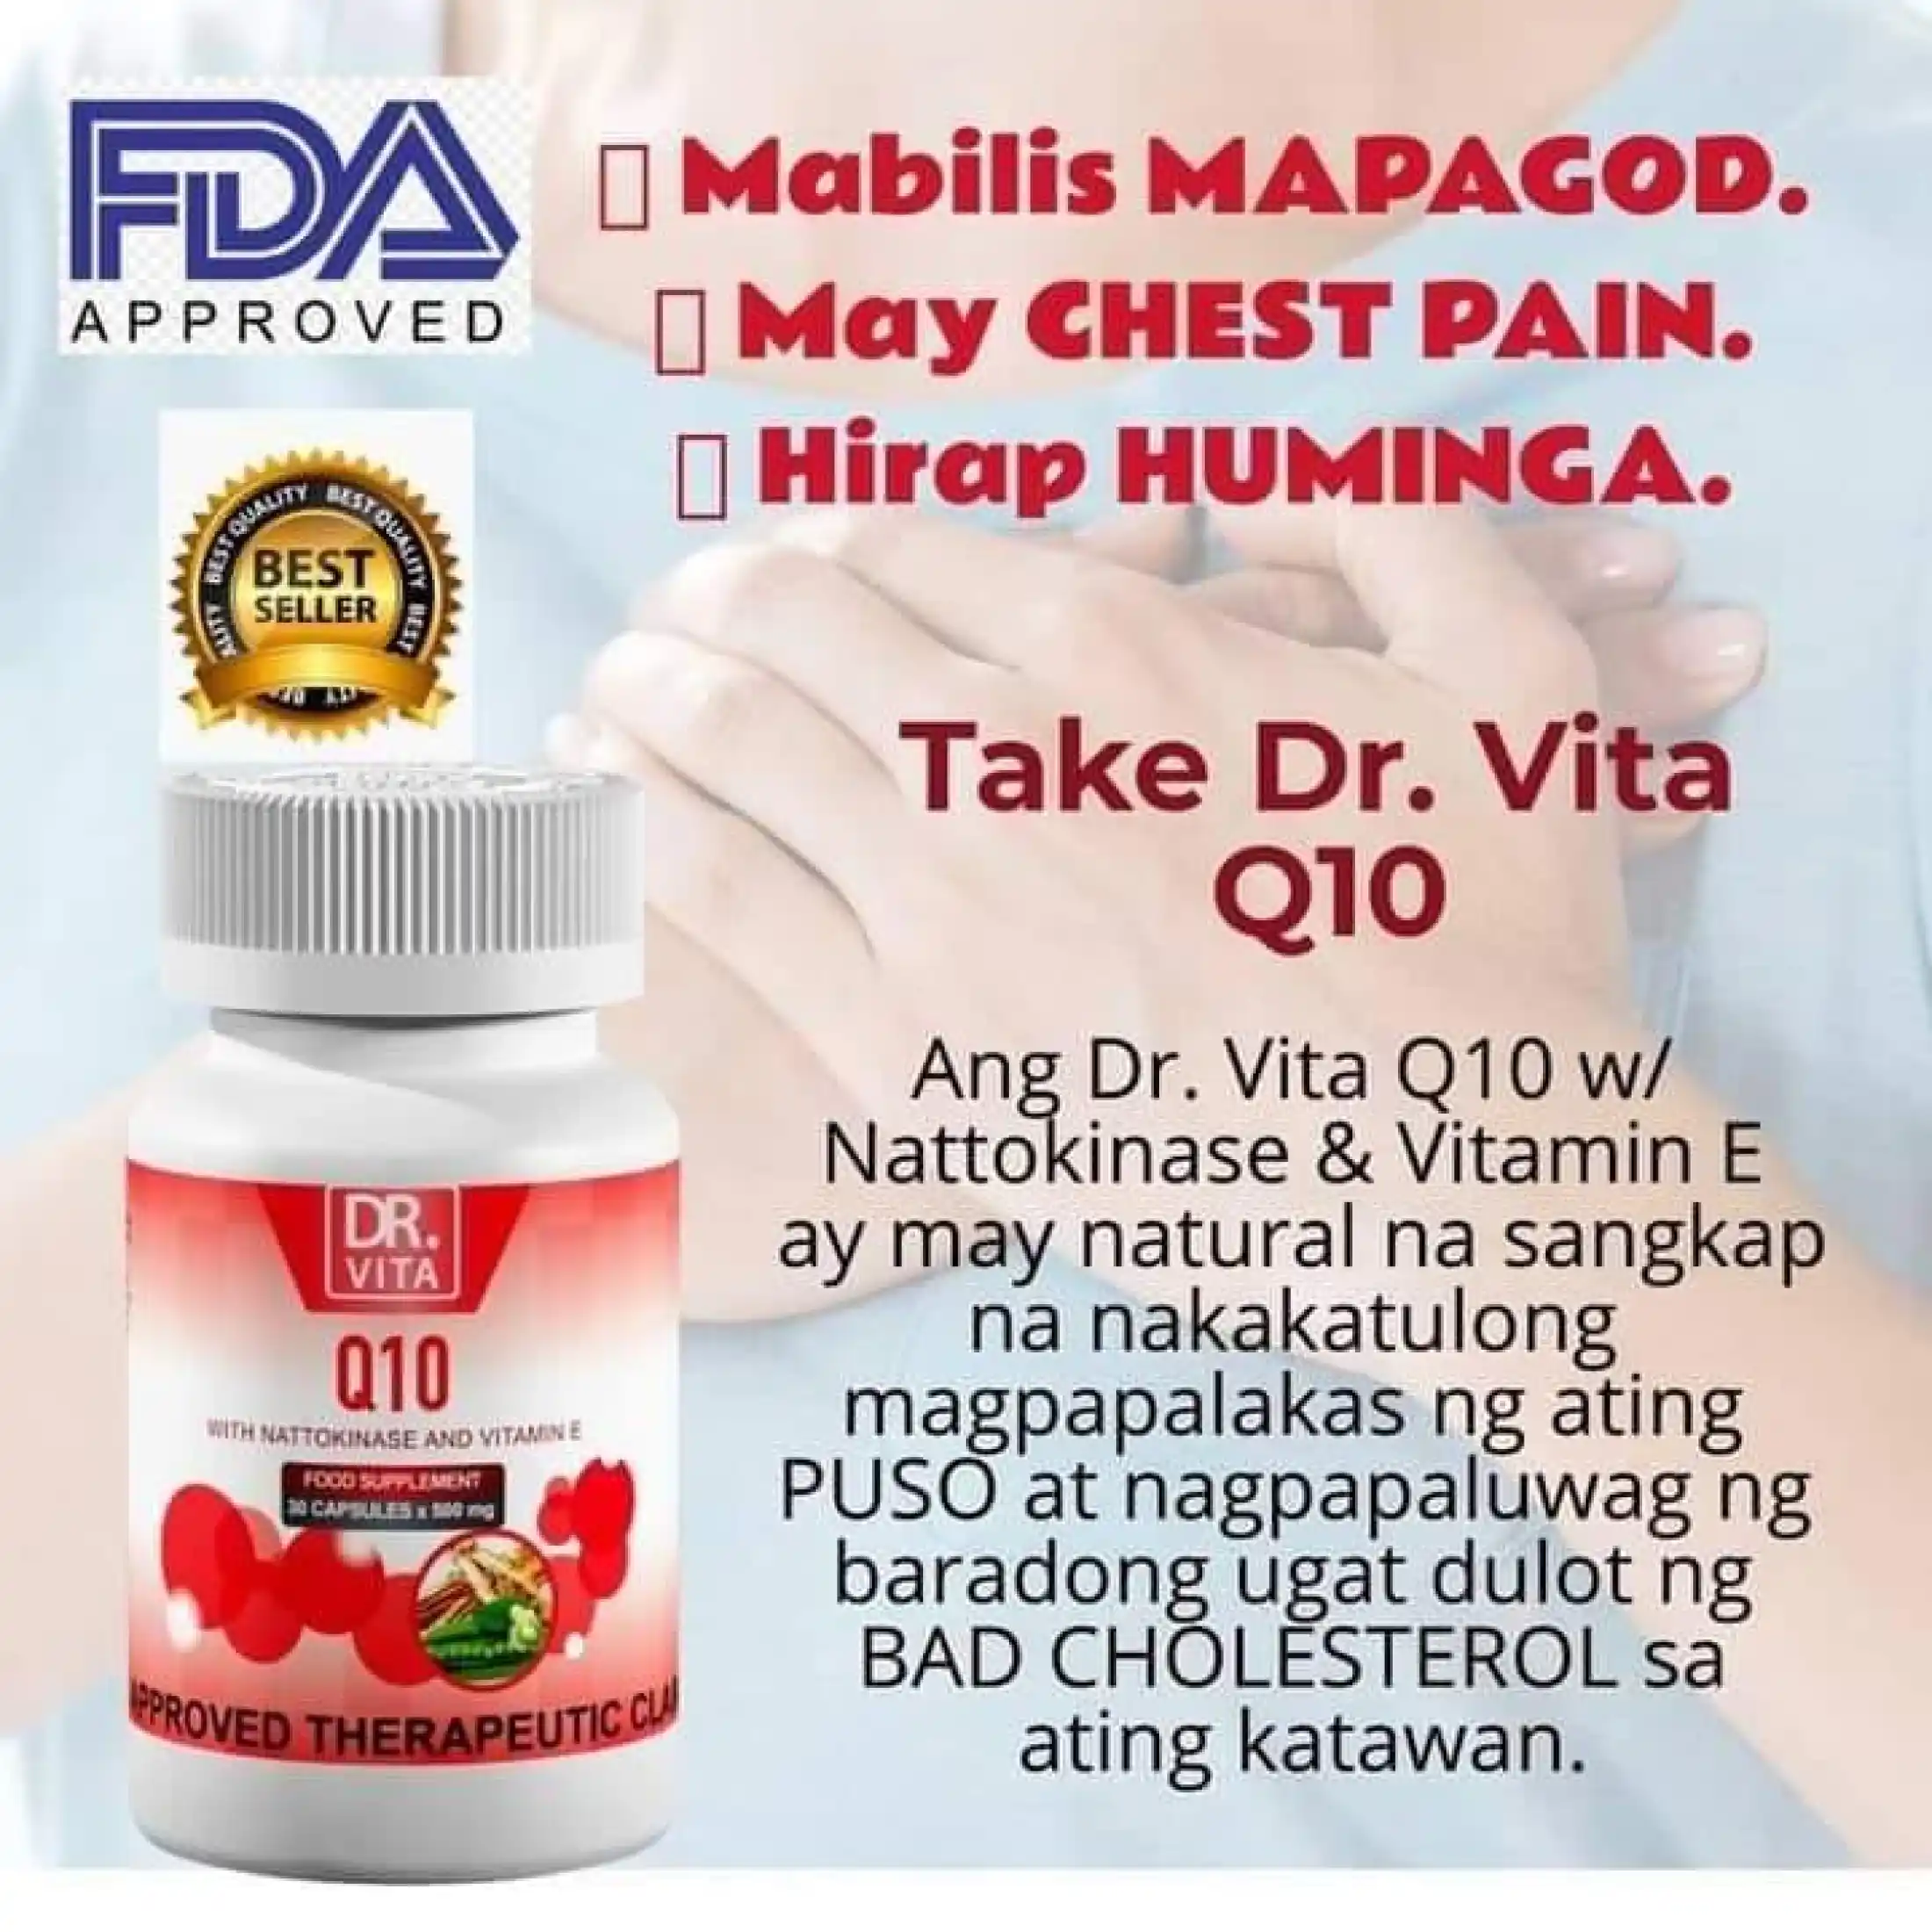 Dr. Vita Authentic Q10 capsule heart failure, for Healthy heart, Control blood pressure and cholesterol, 30 capsules, Control pressure and cholesterol, Authentic capsule for heart failure, for Healthy heart,